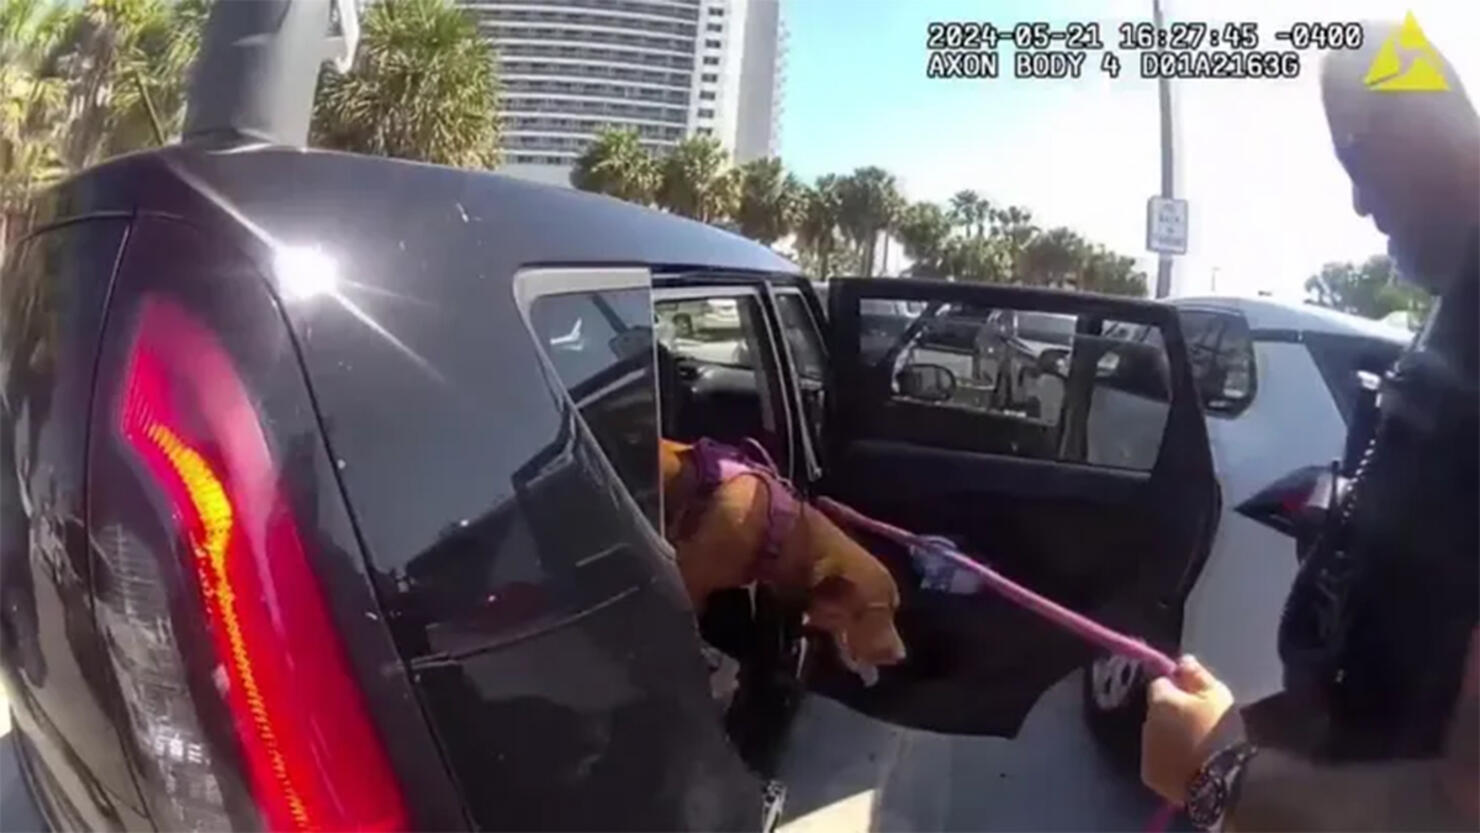 Police Rescue a dog from a hot car